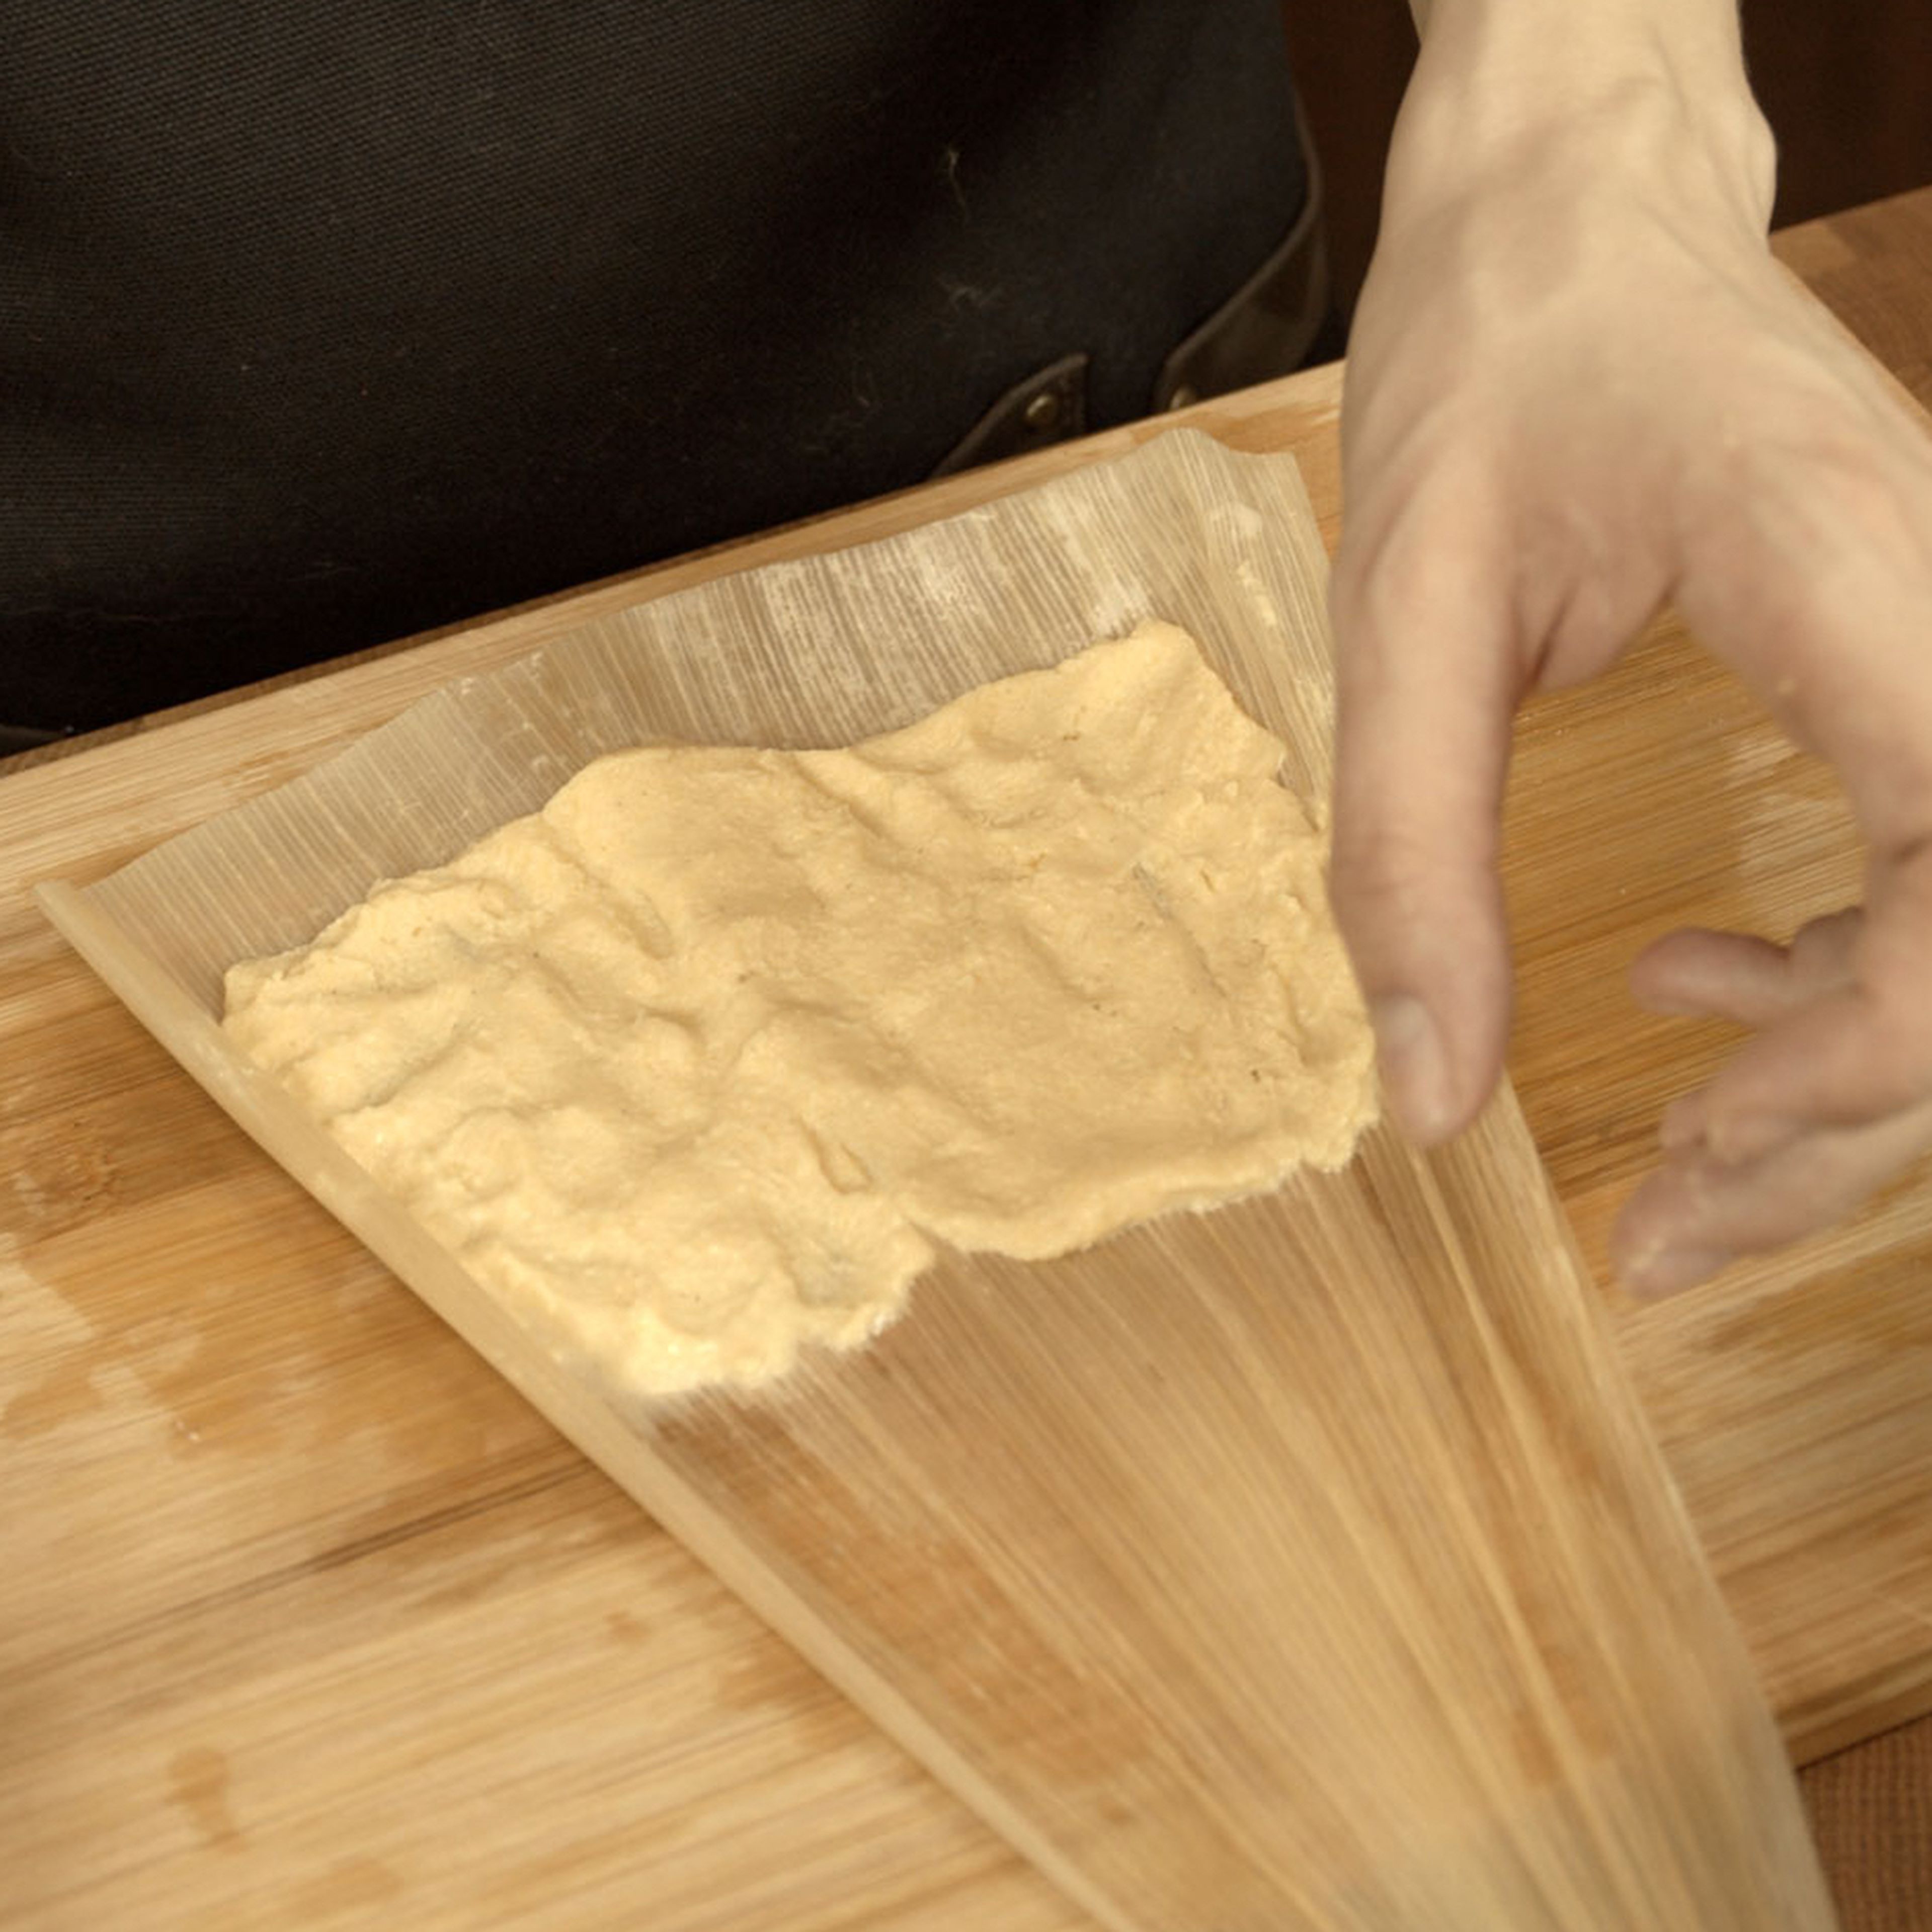 Start assembling the tamales. Lay corn a soaked corn husk glossy side up. Add 2 tbsp of masa dough in the wider half of the corn husk. Spread it evenly in the wider half, leave 1-2 cm gap from top and sides. Tip: dip your fingers in a bowl with clean water, it will prevent dough from sticking